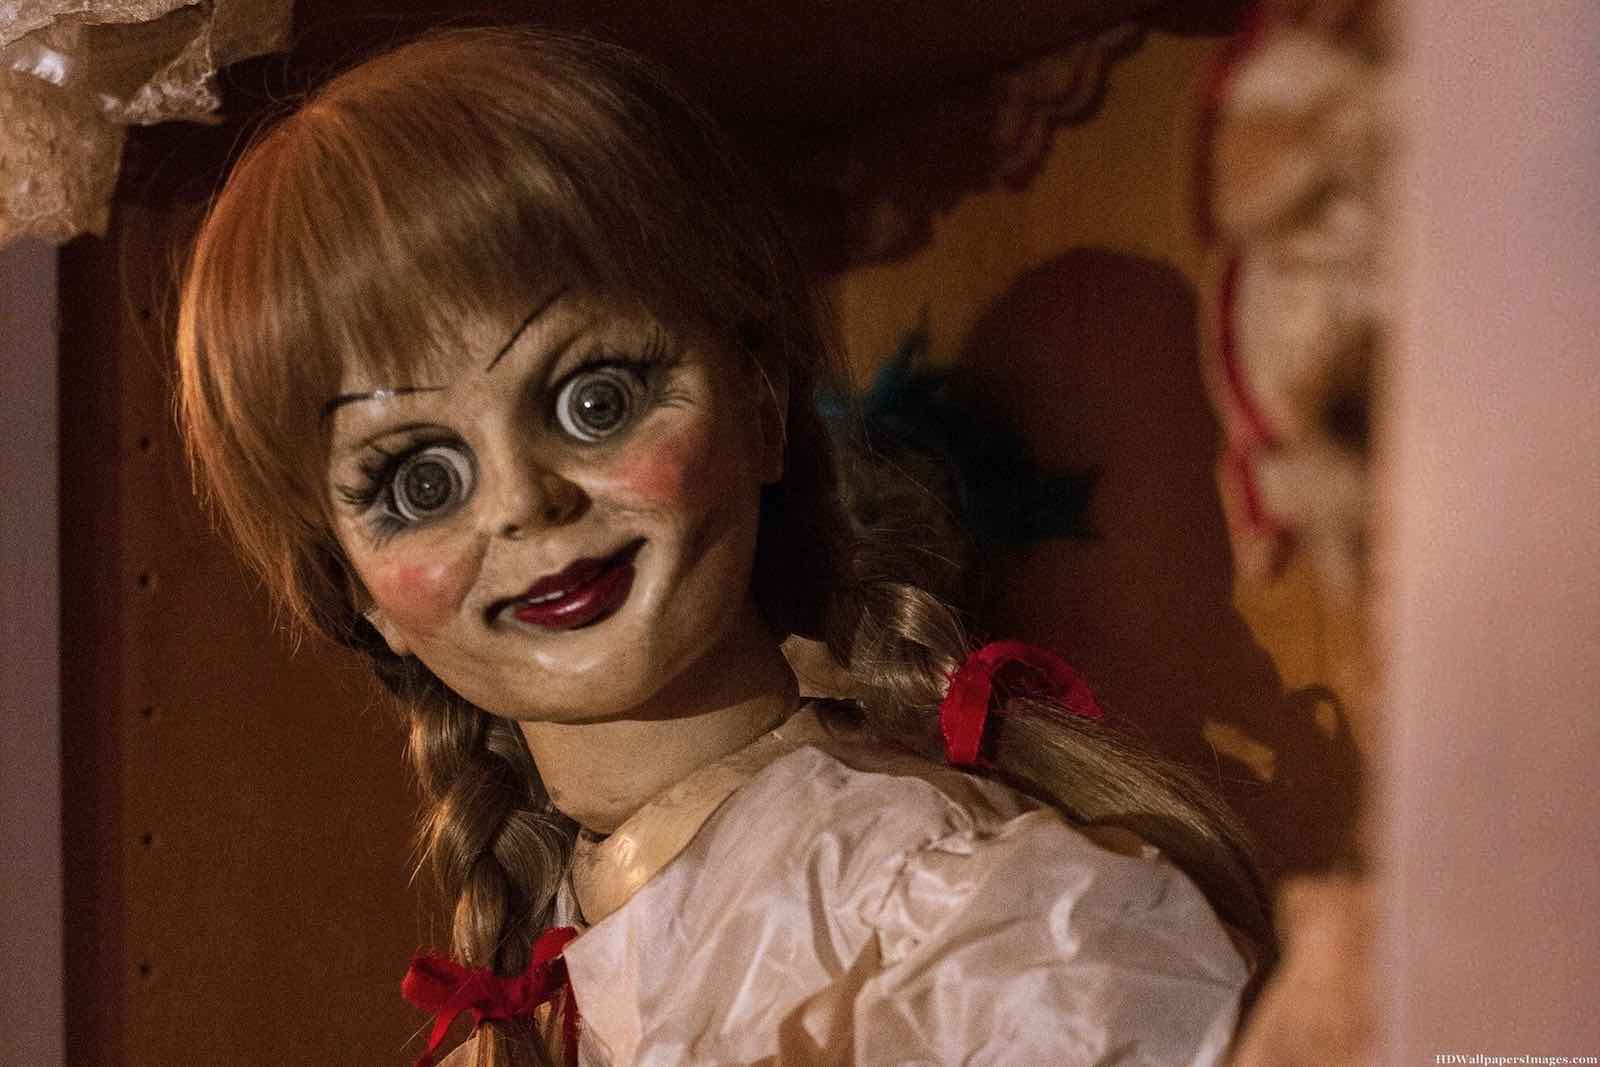 annabelle the doll in museum